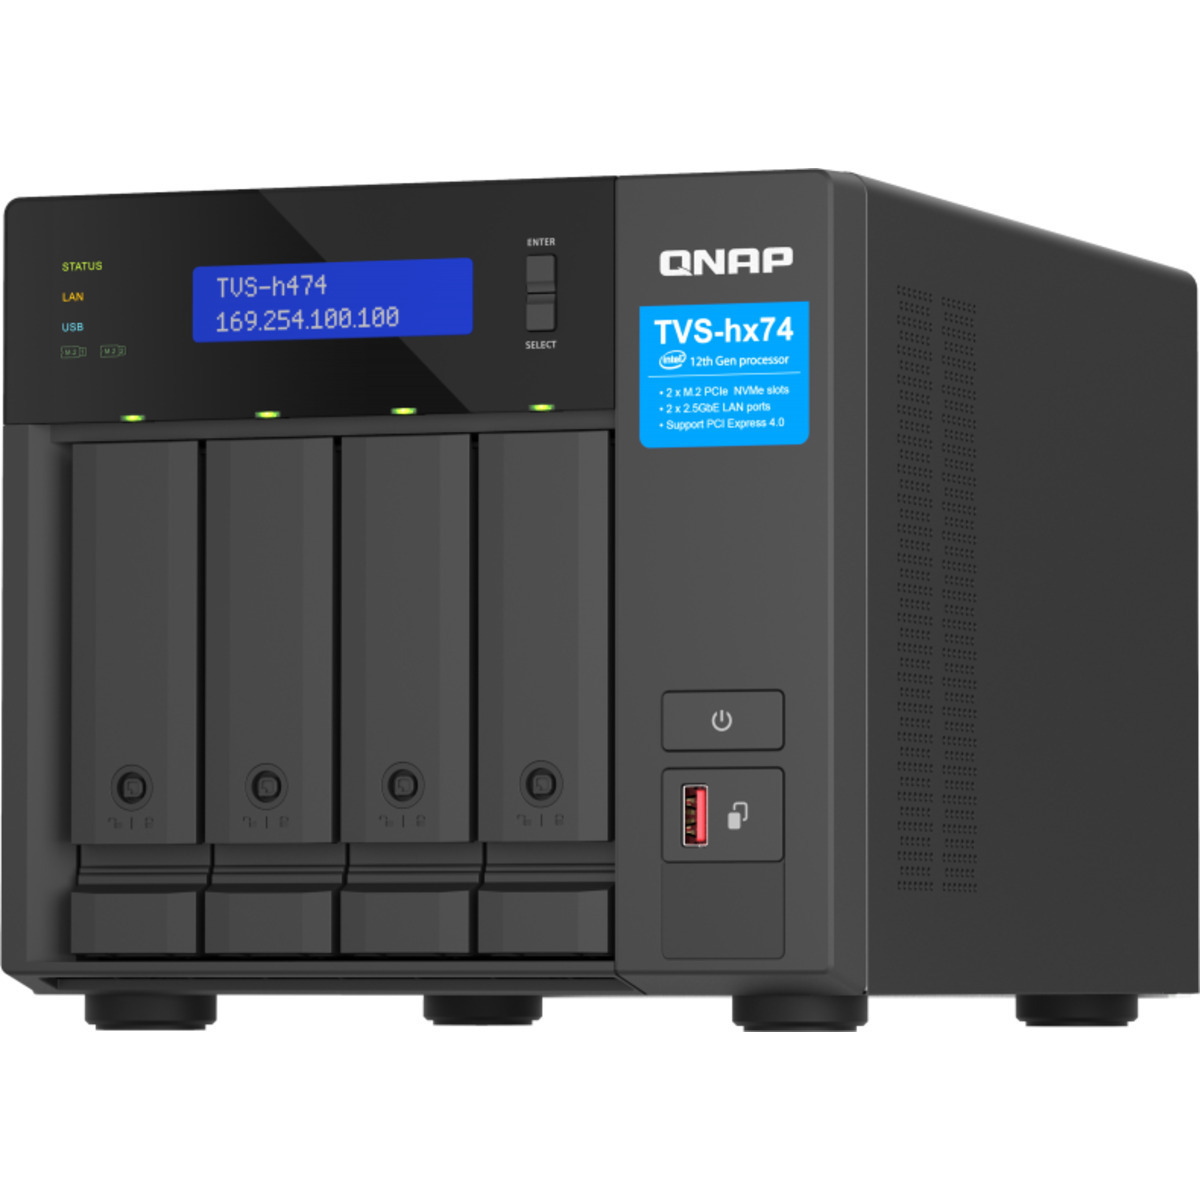 buy QNAP TVS-h474 Pentium Gold 8tb Desktop NAS - Network Attached Storage Device 4x2000gb Seagate IronWolf Pro ST2000NT001 3.5 7200rpm SATA 6Gb/s HDD NAS Class Drives Installed - Burn-In Tested - FREE RAM UPGRADE - nas headquarters buy network attached storage server device das new raid-5 free shipping simply usa TVS-h474 Pentium Gold